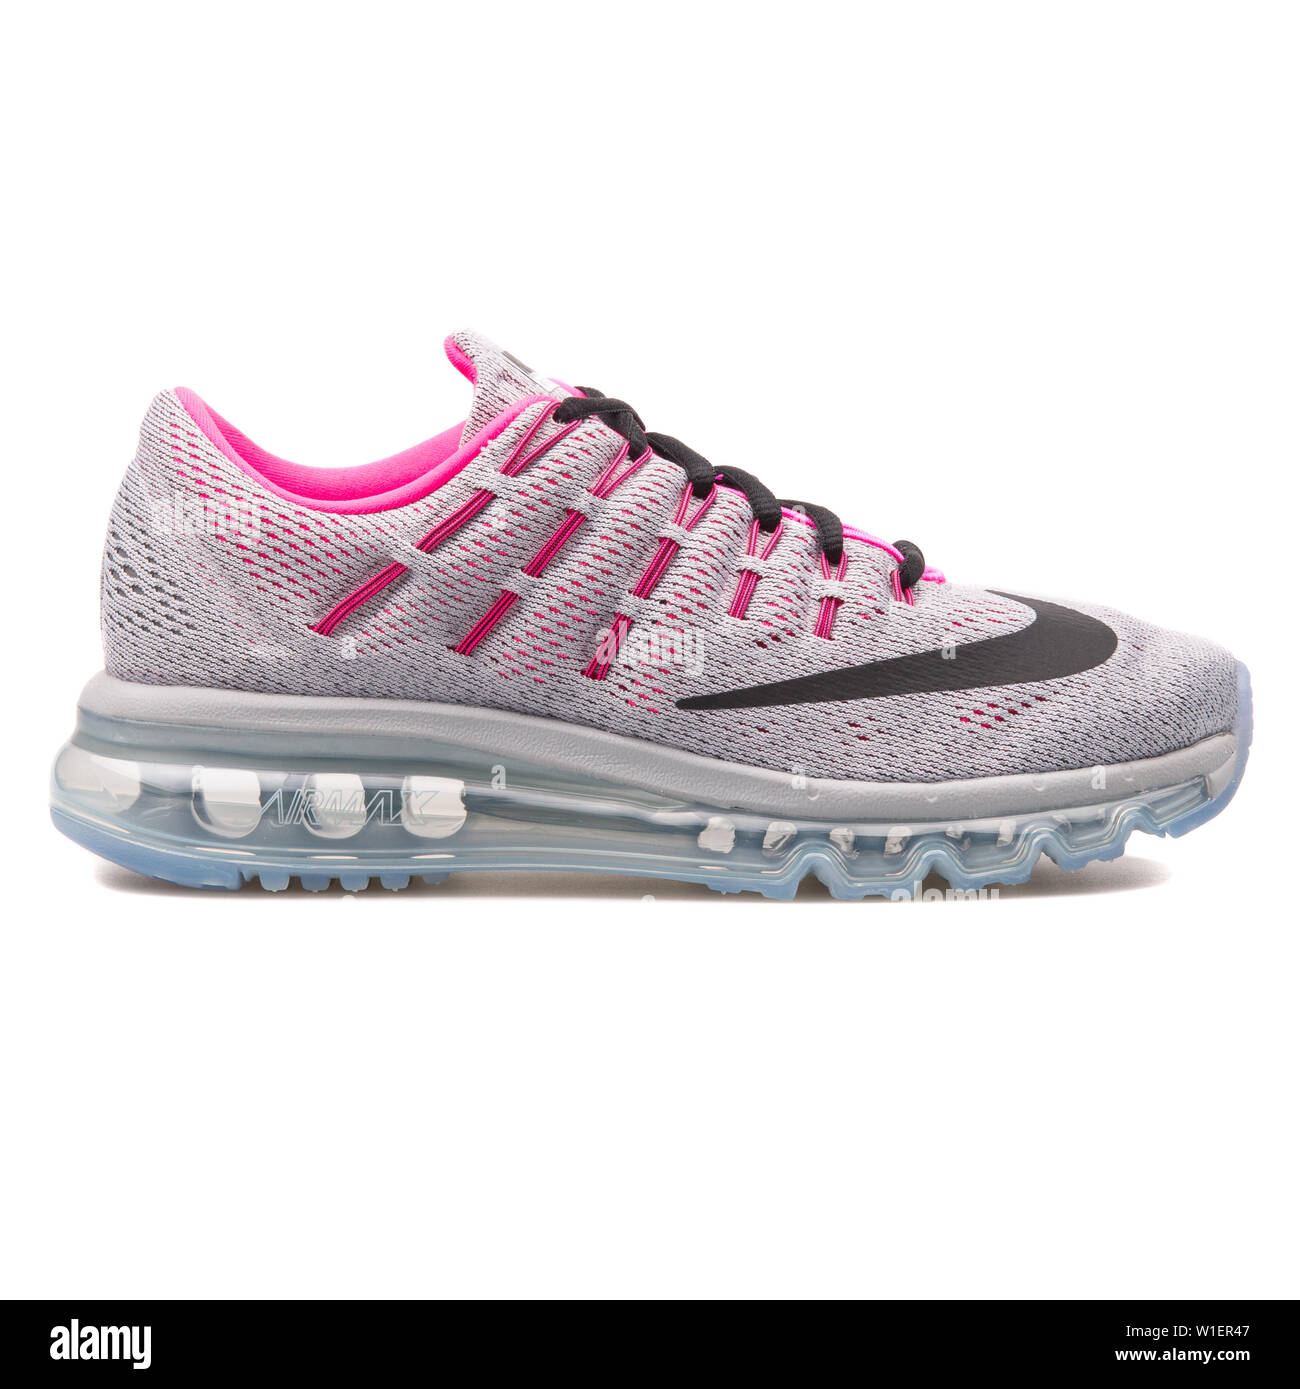 VIENNA, AUSTRIA - AUGUST 10, 2017: Nike Air Max 2016 grey and pink sneaker  on white background Stock Photo - Alamy